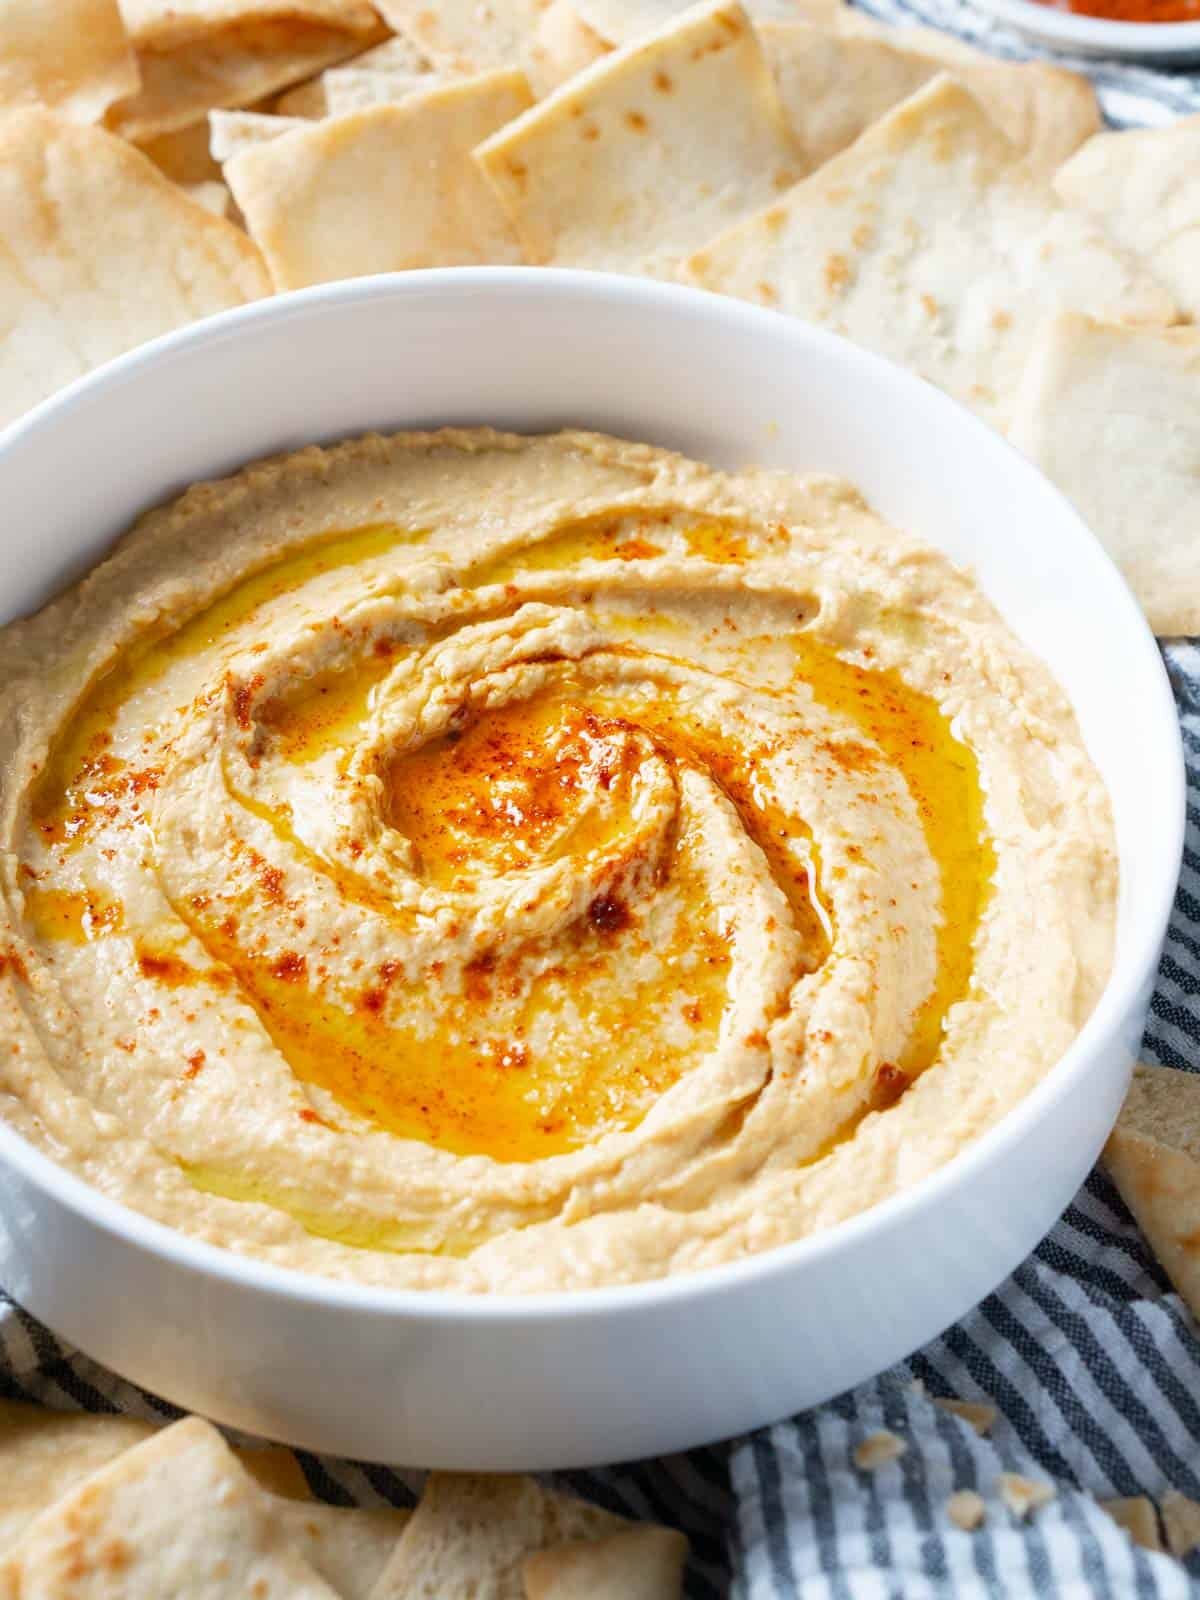 hummus garnished with olive oil and paprika in white bowl next to pita chips